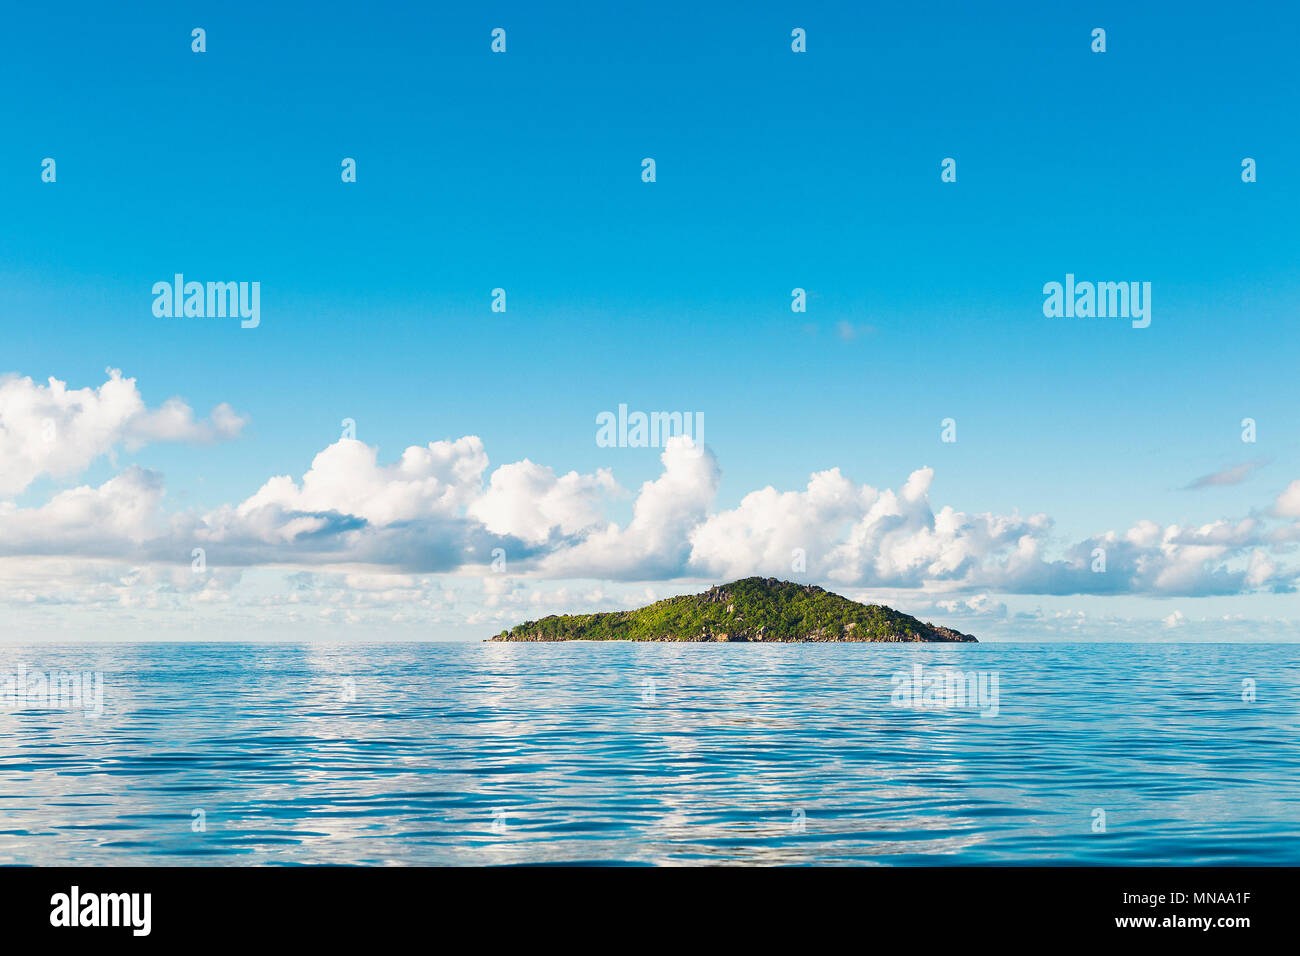 Scenic view of seascape against blue sky, Island of Petite Soeur ...